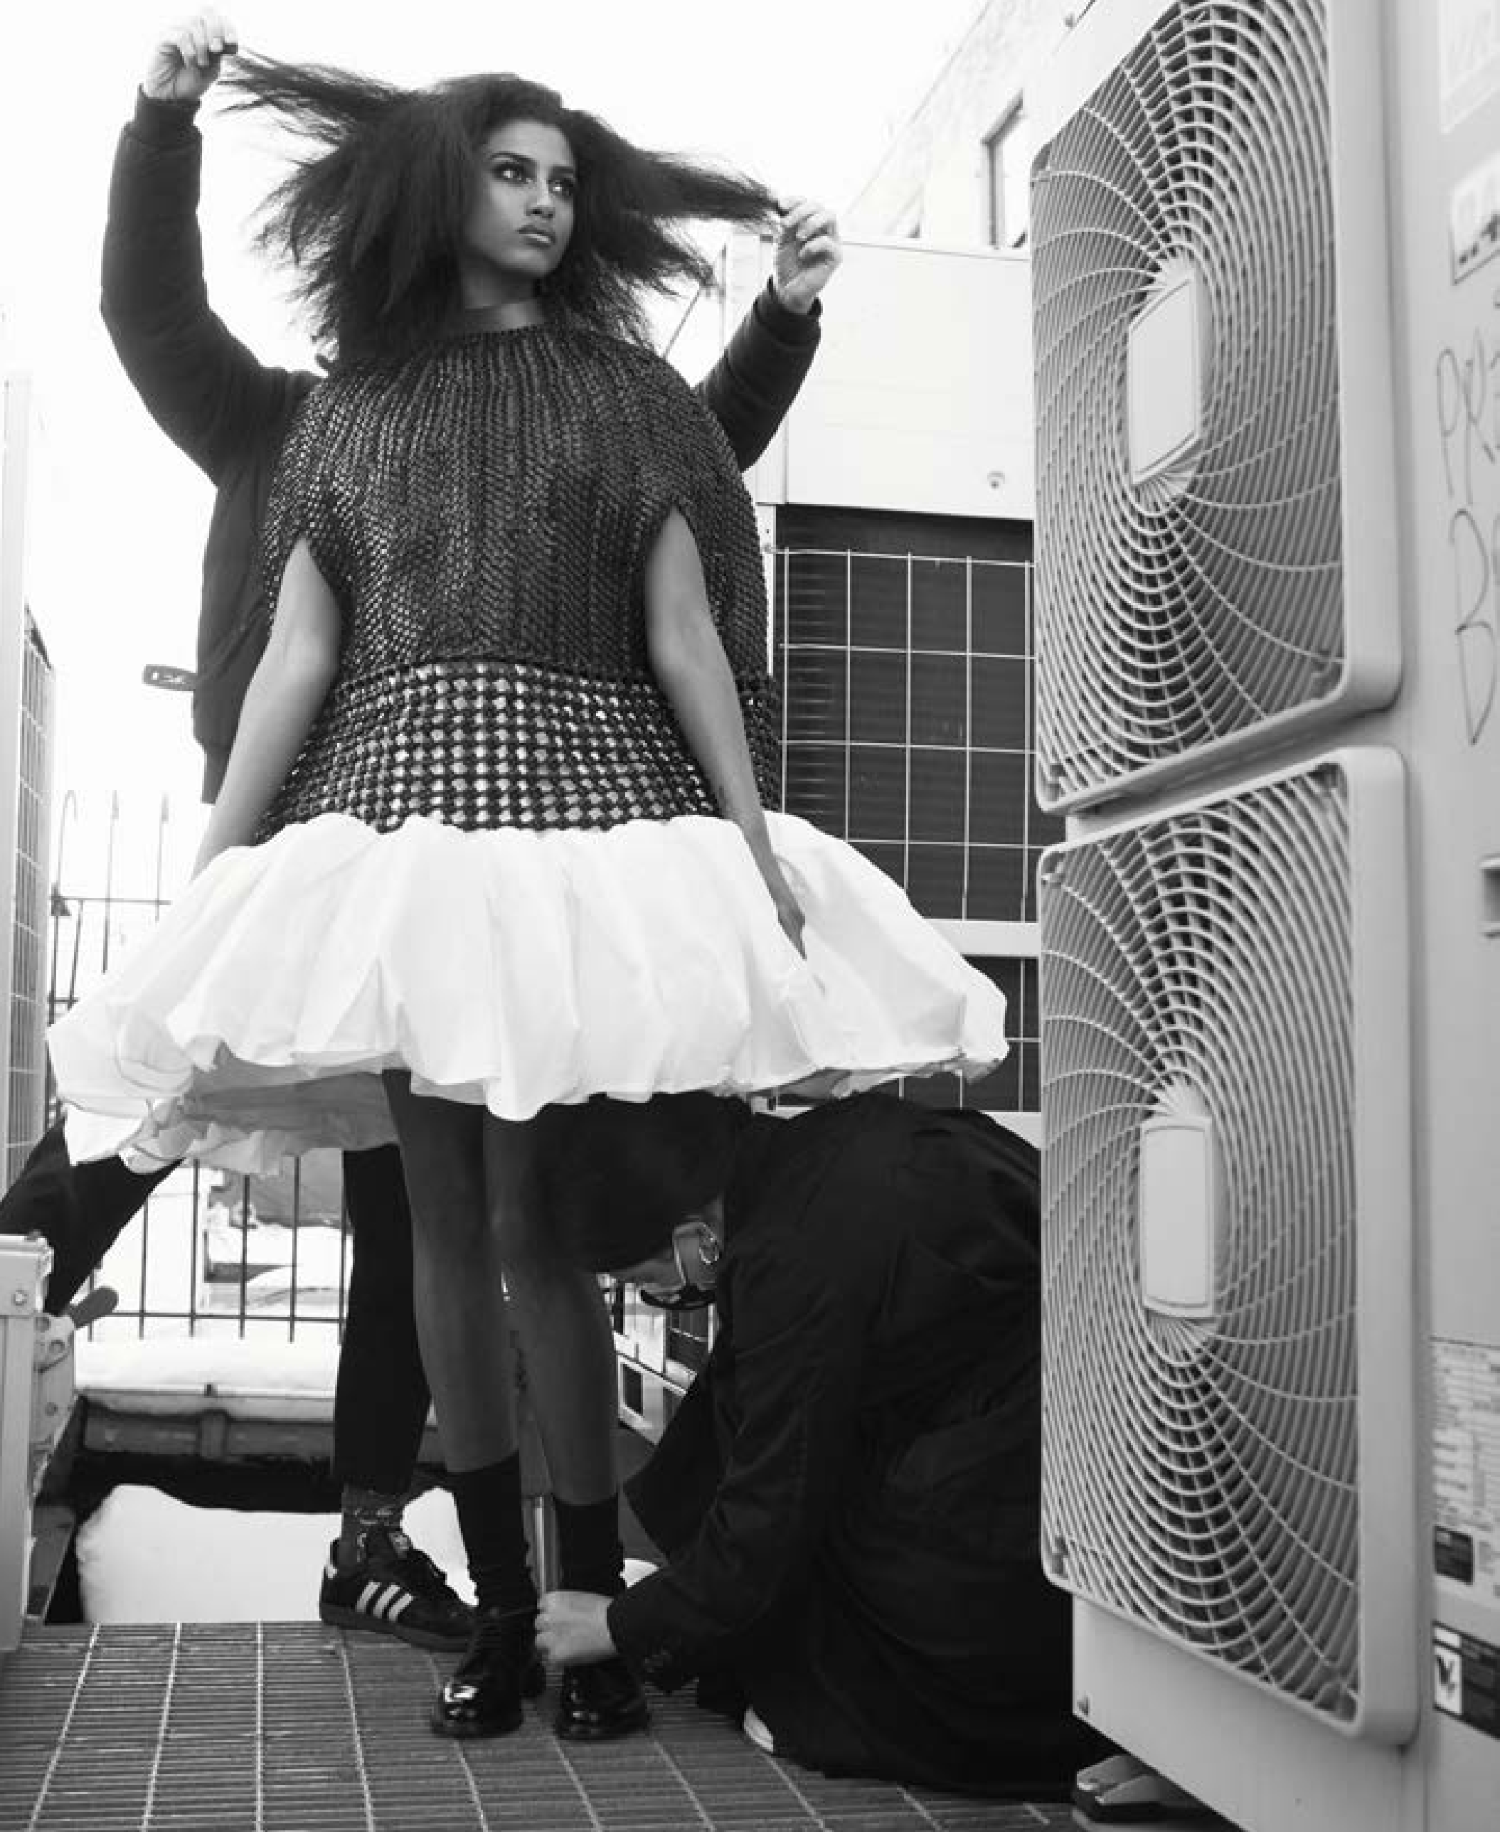 Imaan Hammam by Ethan James Green M Le Mag du Monde 2-27-21 (12).png